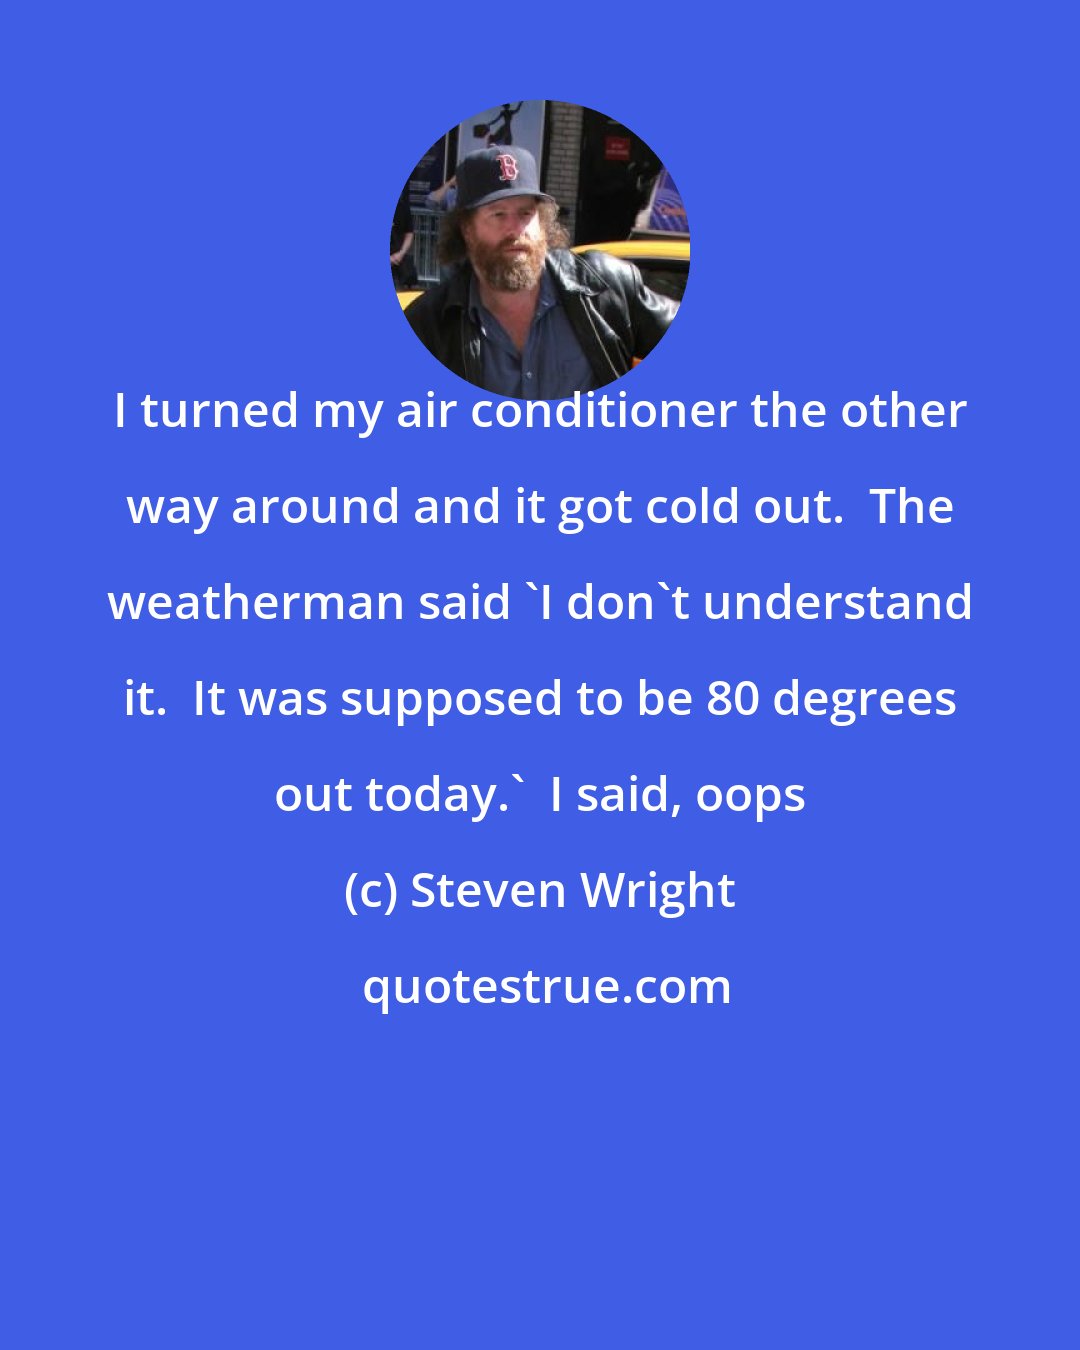 Steven Wright: I turned my air conditioner the other way around and it got cold out.  The weatherman said 'I don't understand it.  It was supposed to be 80 degrees out today.'  I said, oops